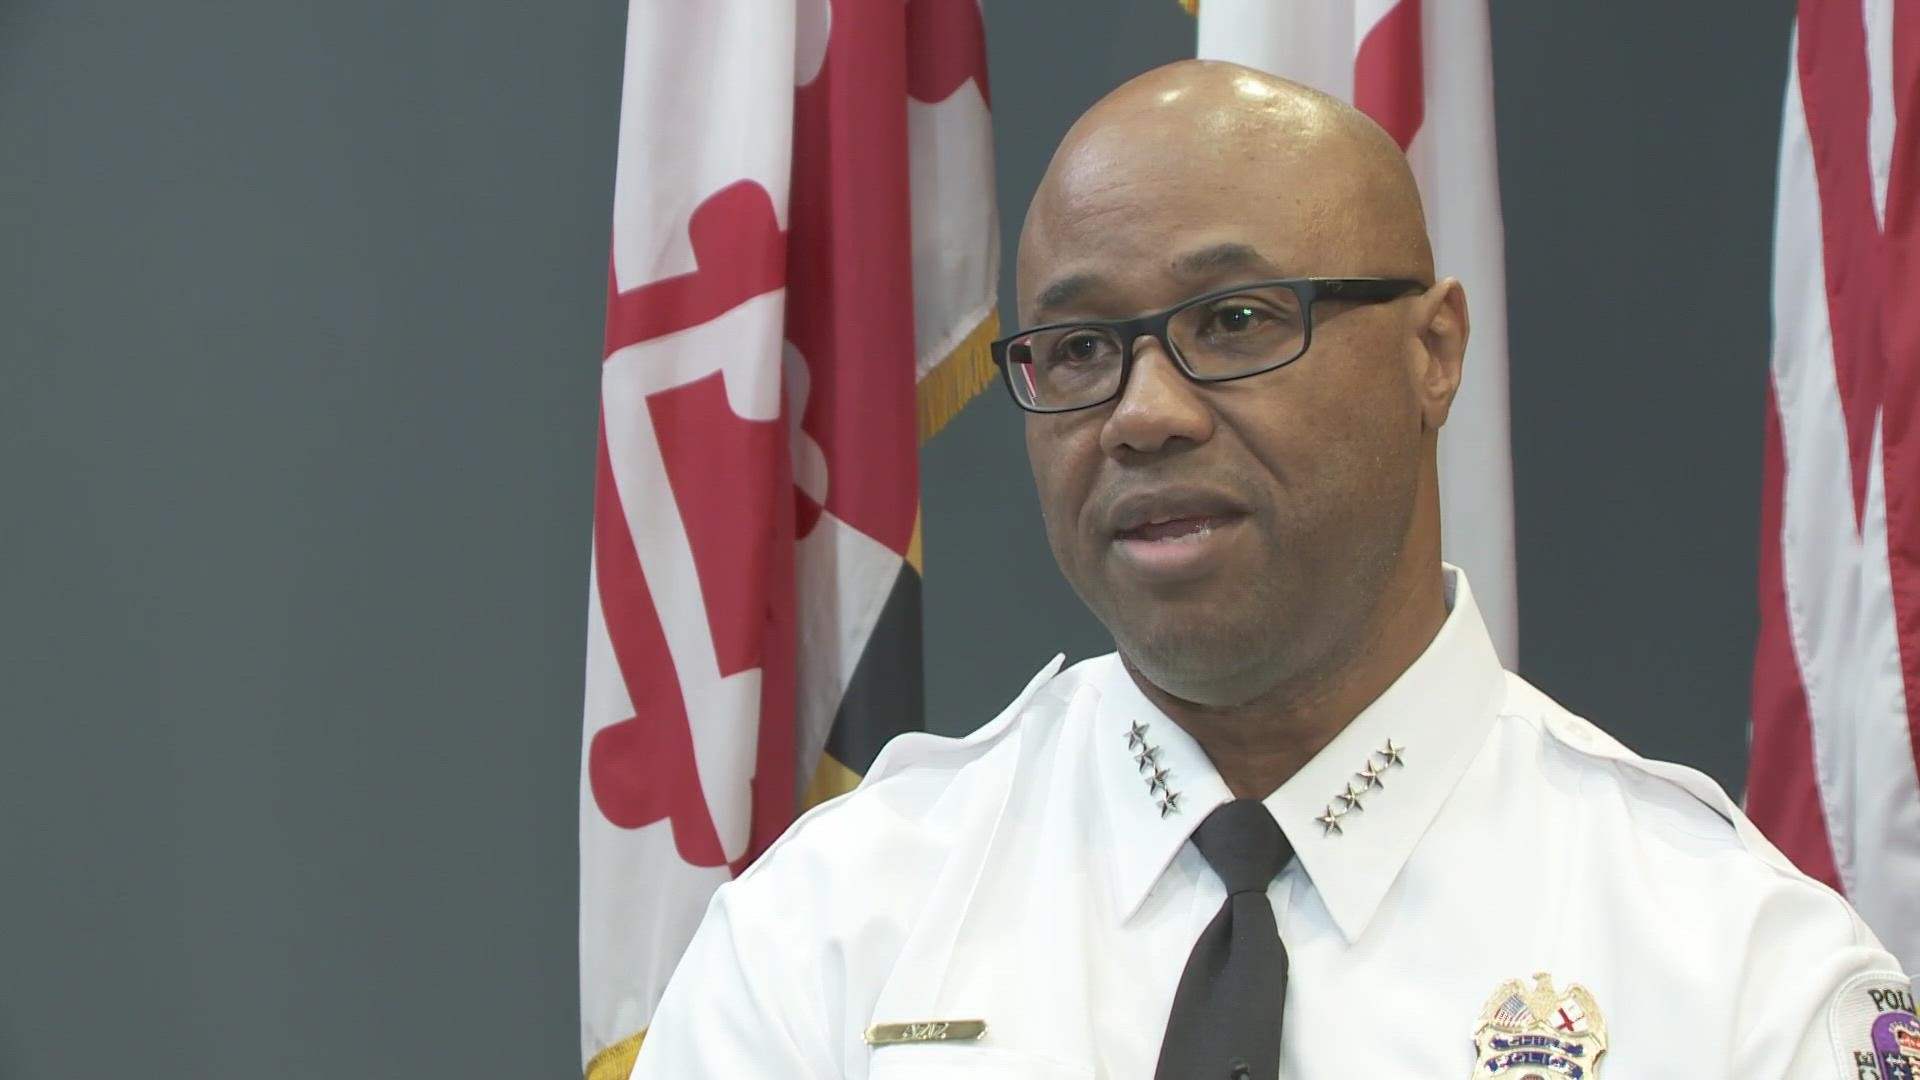 WUSA9 sits down with Prince George's County Police Chief Malik Chief for his first one-on-one interview.